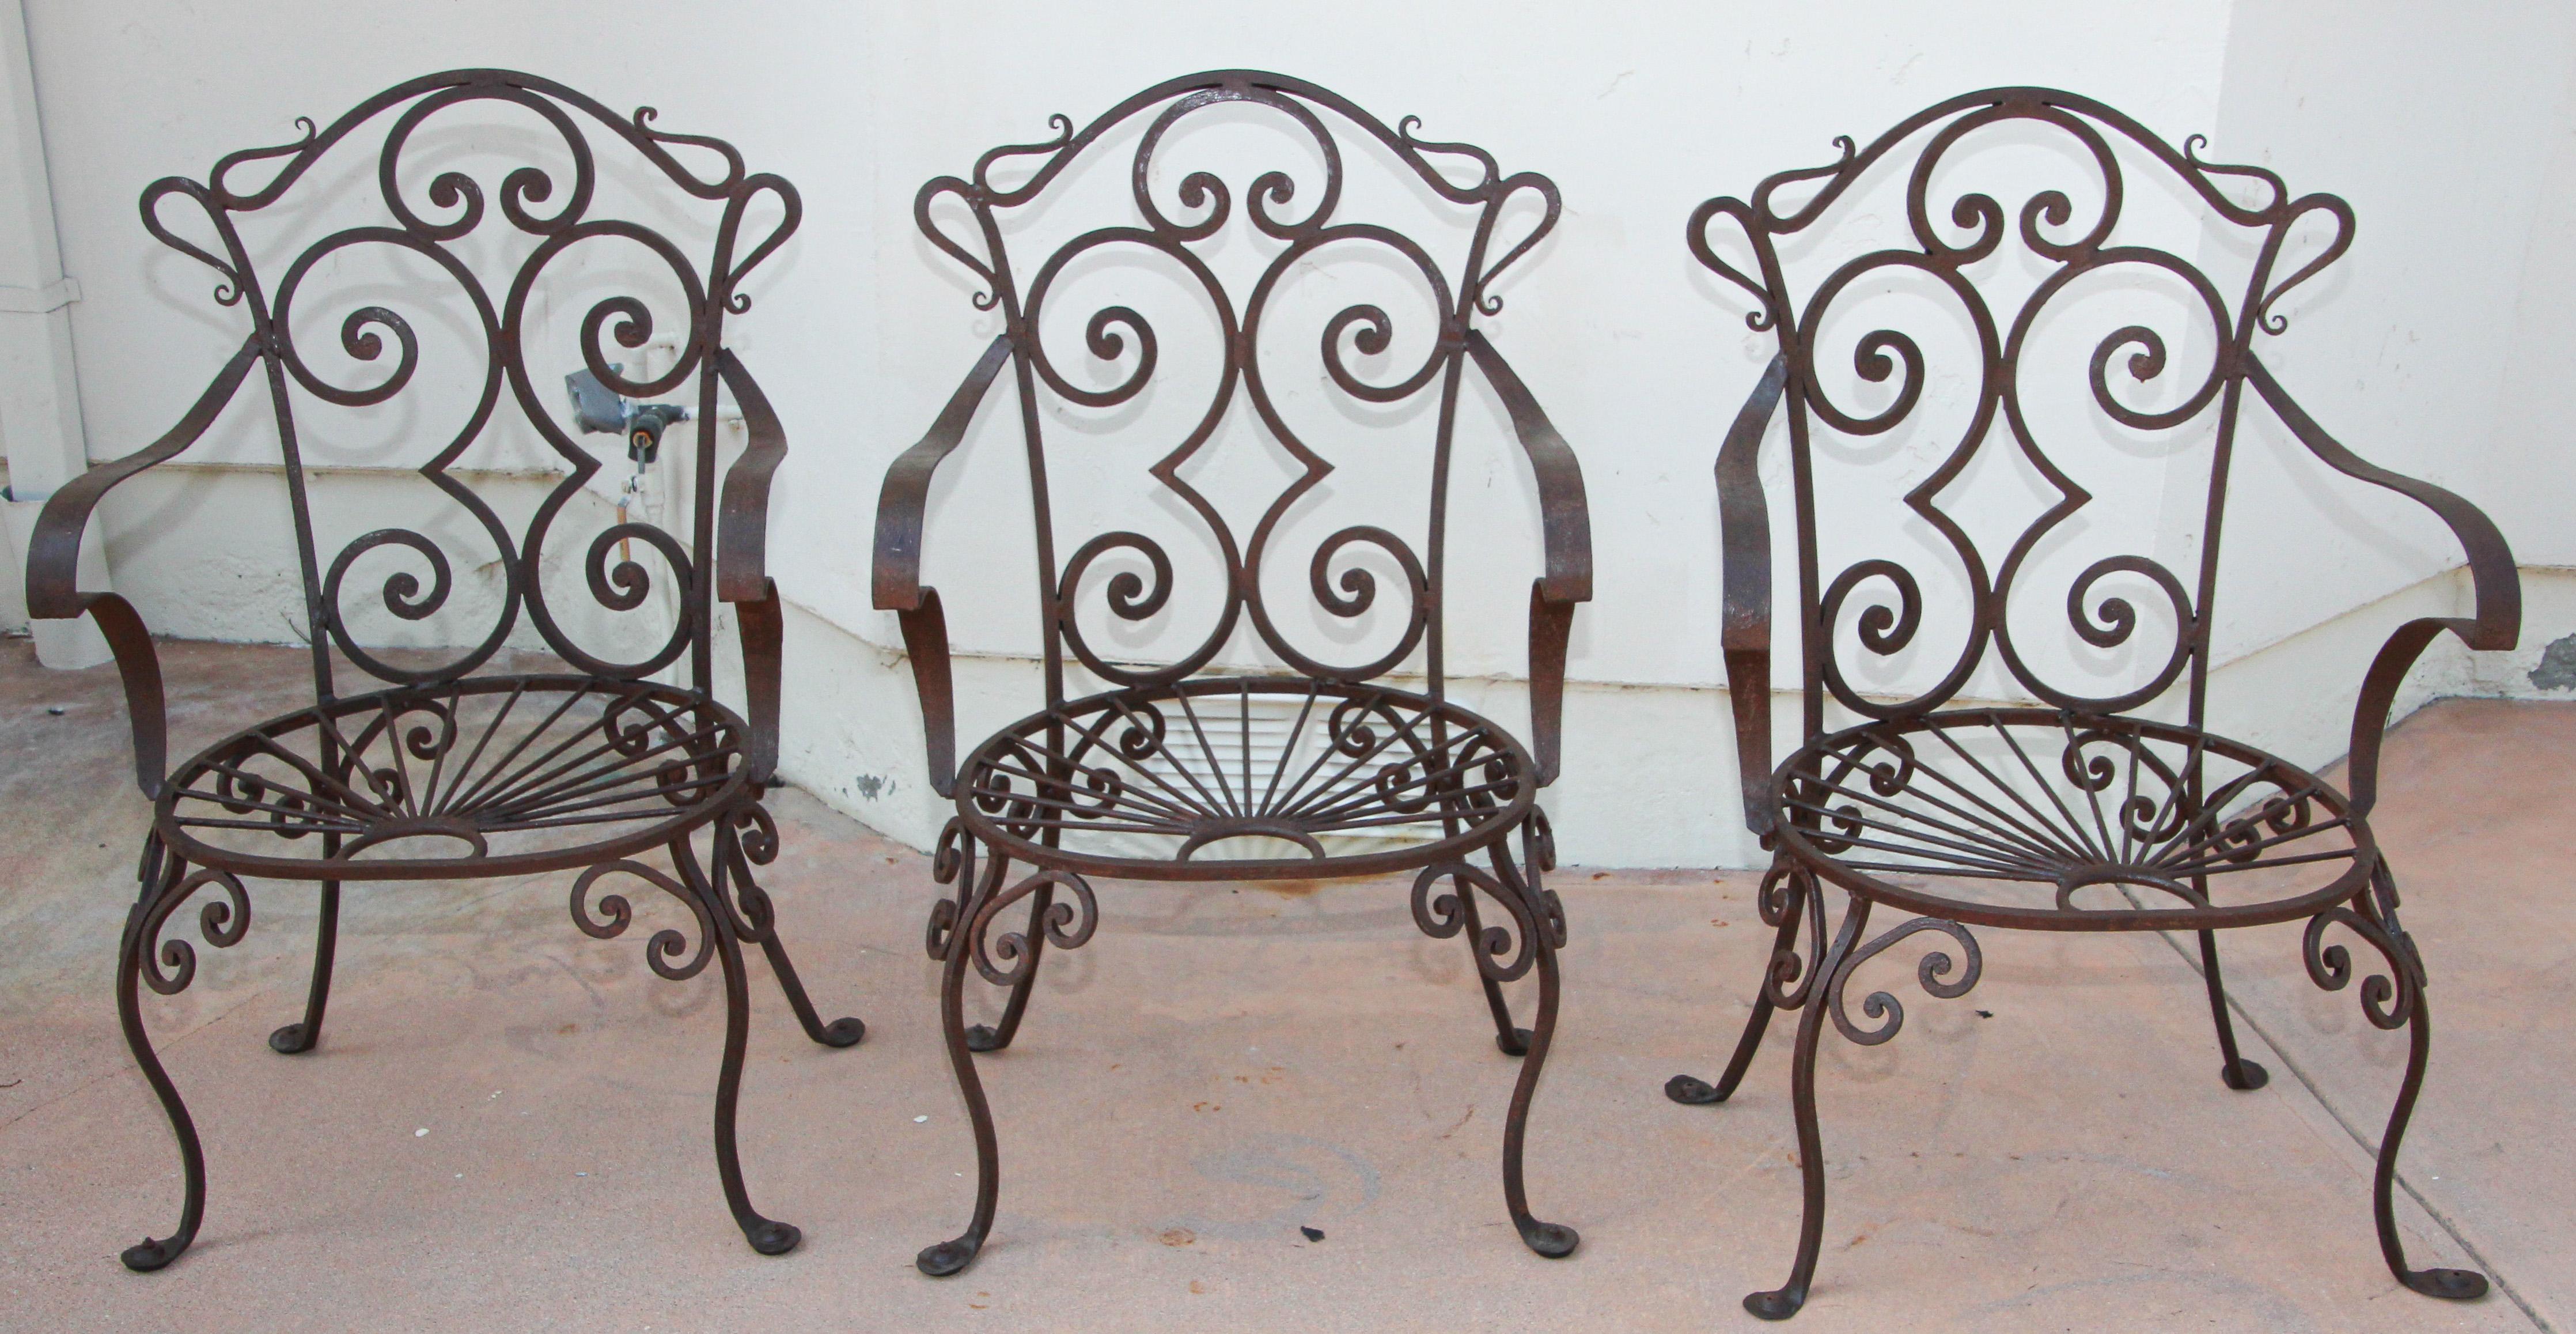 Hand-Crafted Wrought Iron Outdoor Set of 6 Armchairs in Jean-Charles Moreux Style